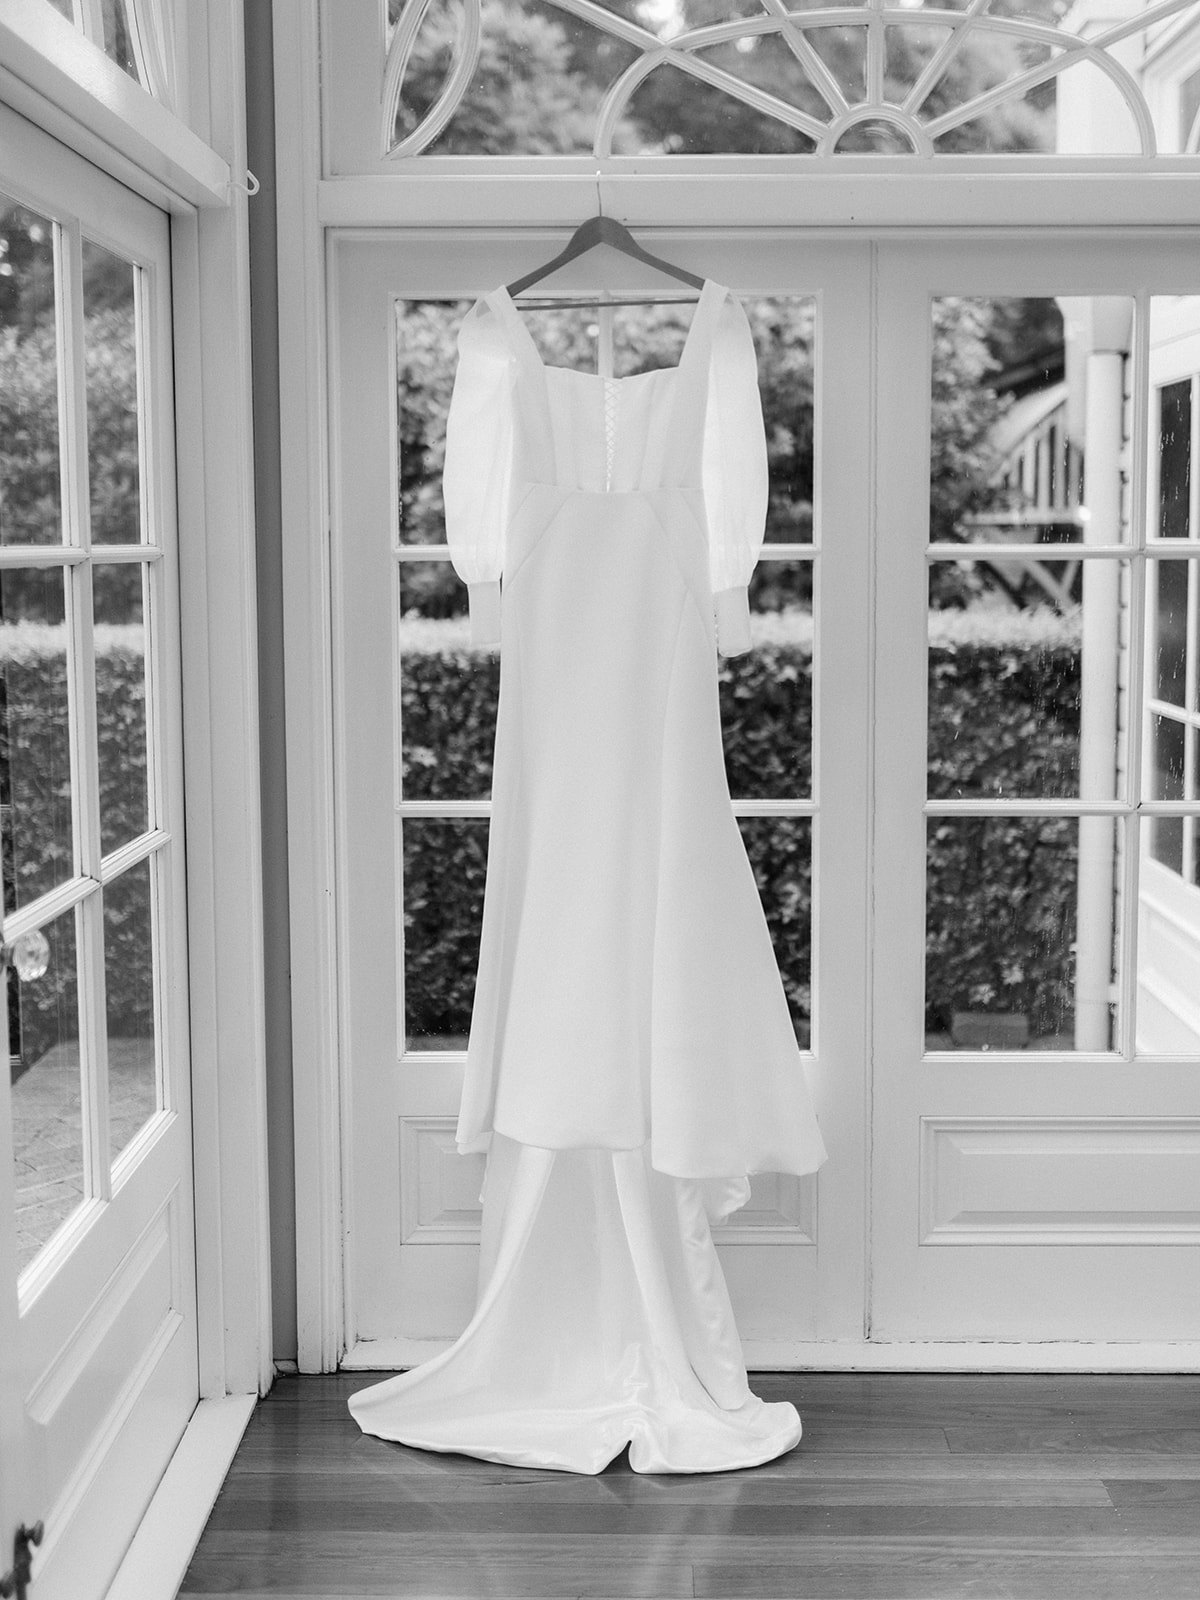 Wedding dress hanging in front of french doors